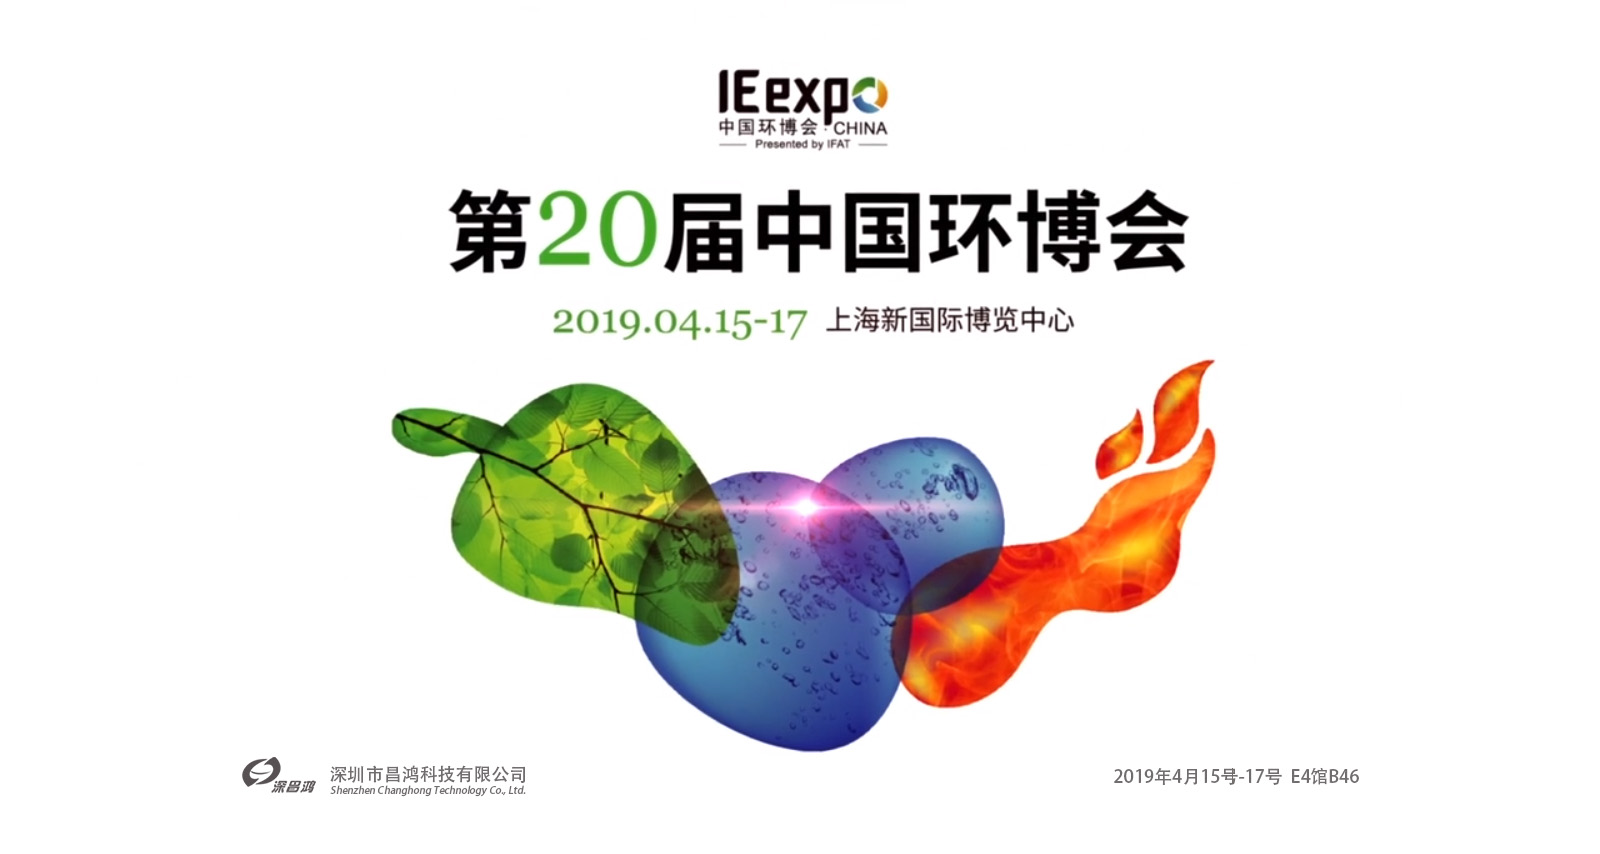 We'll be glad to meet you at the Shanghai Expo World